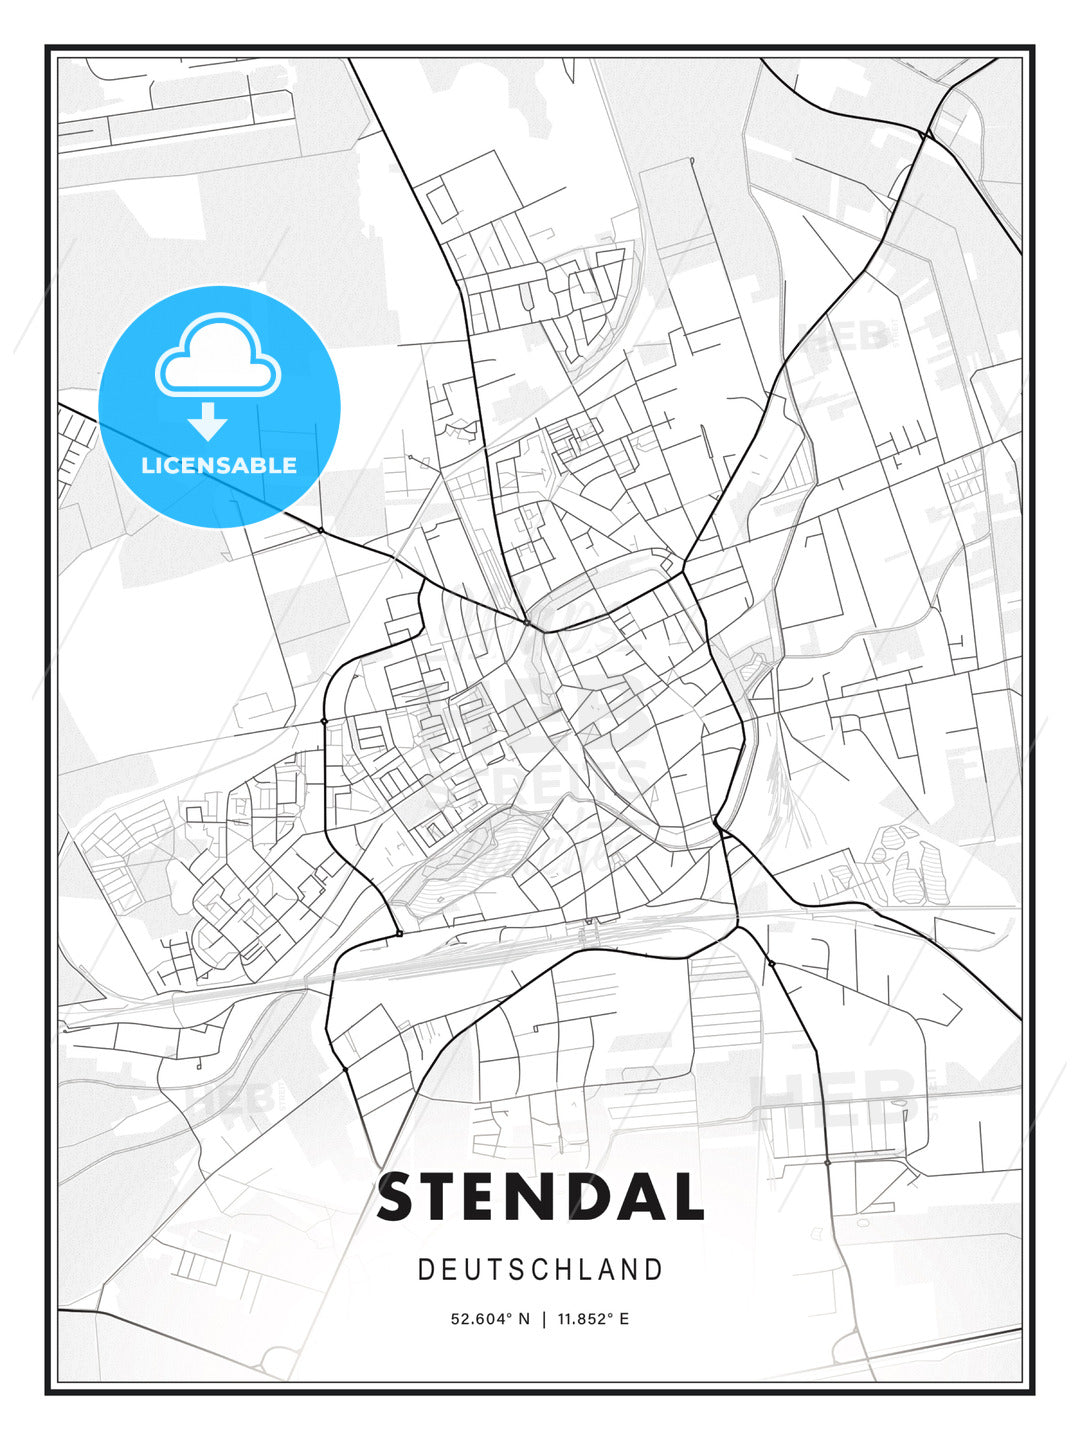 Stendal, Germany, Modern Print Template in Various Formats - HEBSTREITS Sketches